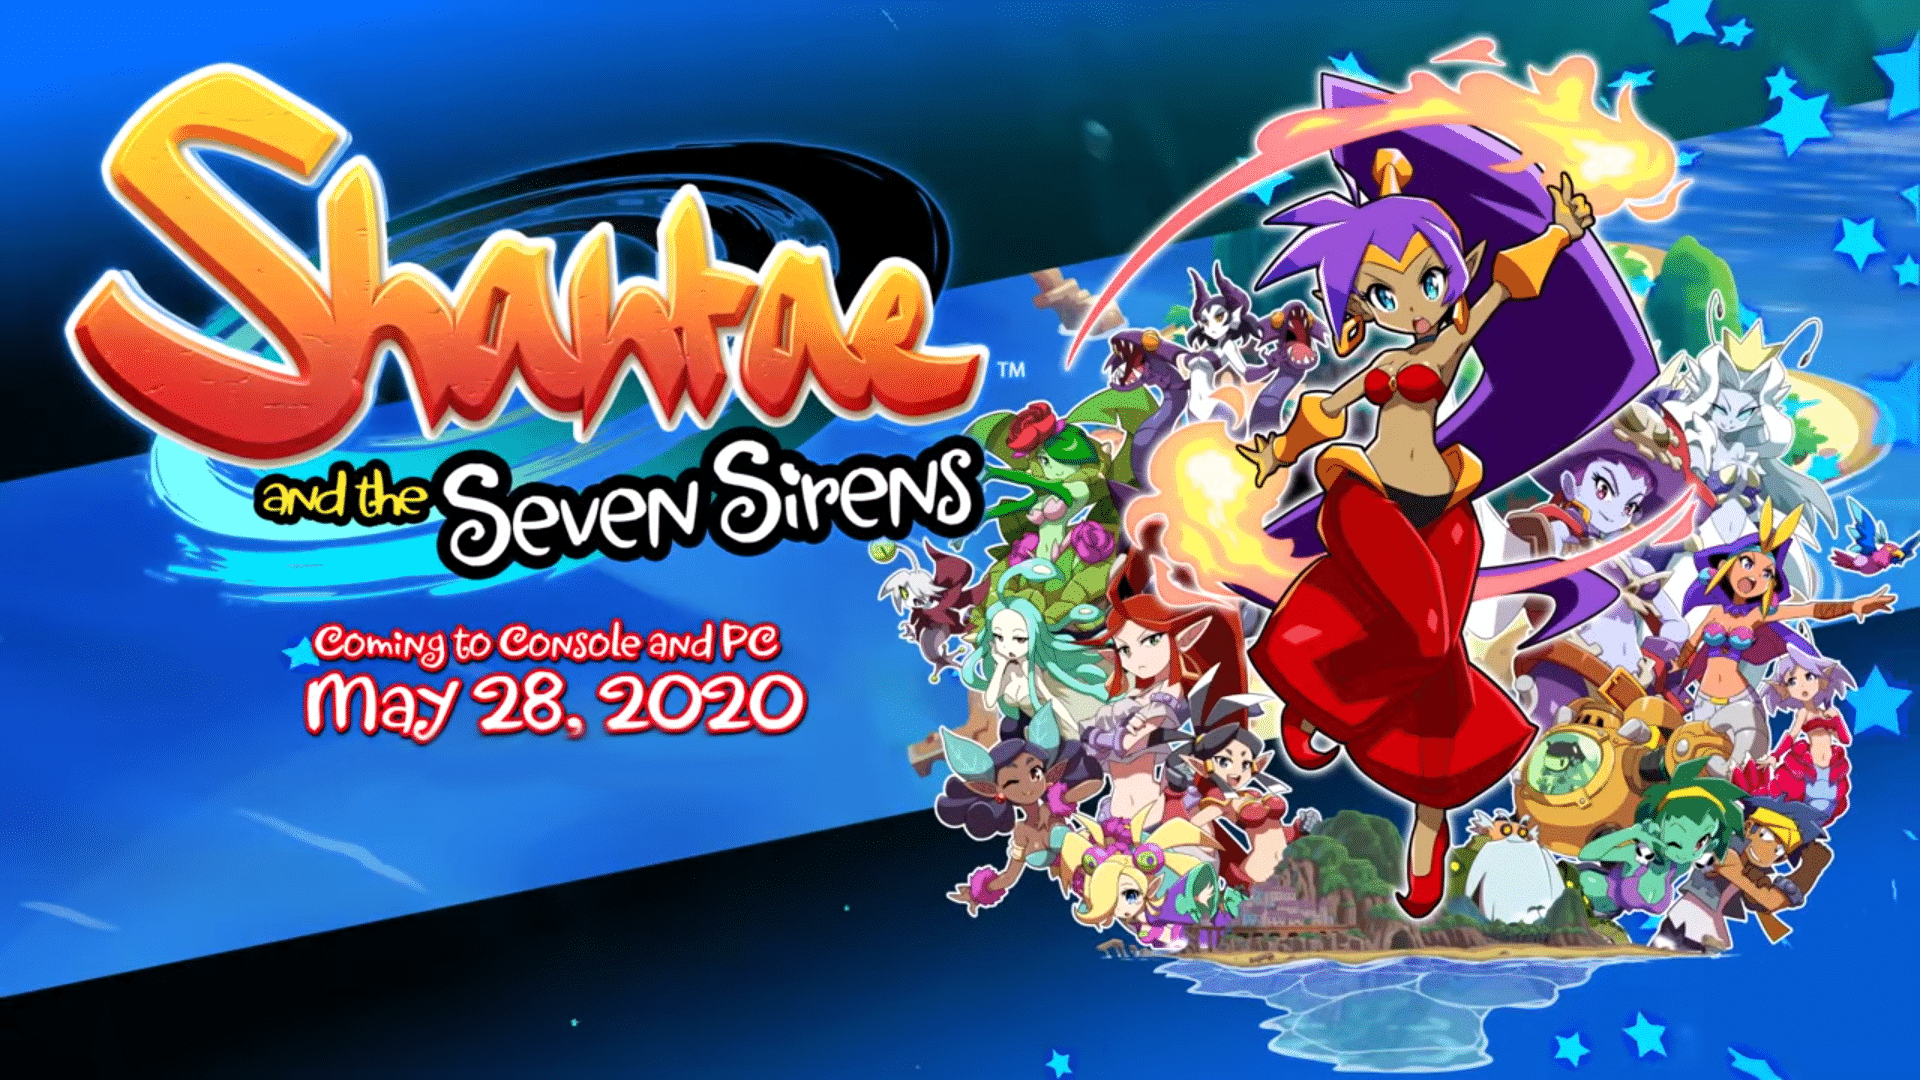 shantae and the seven sirens physical release date